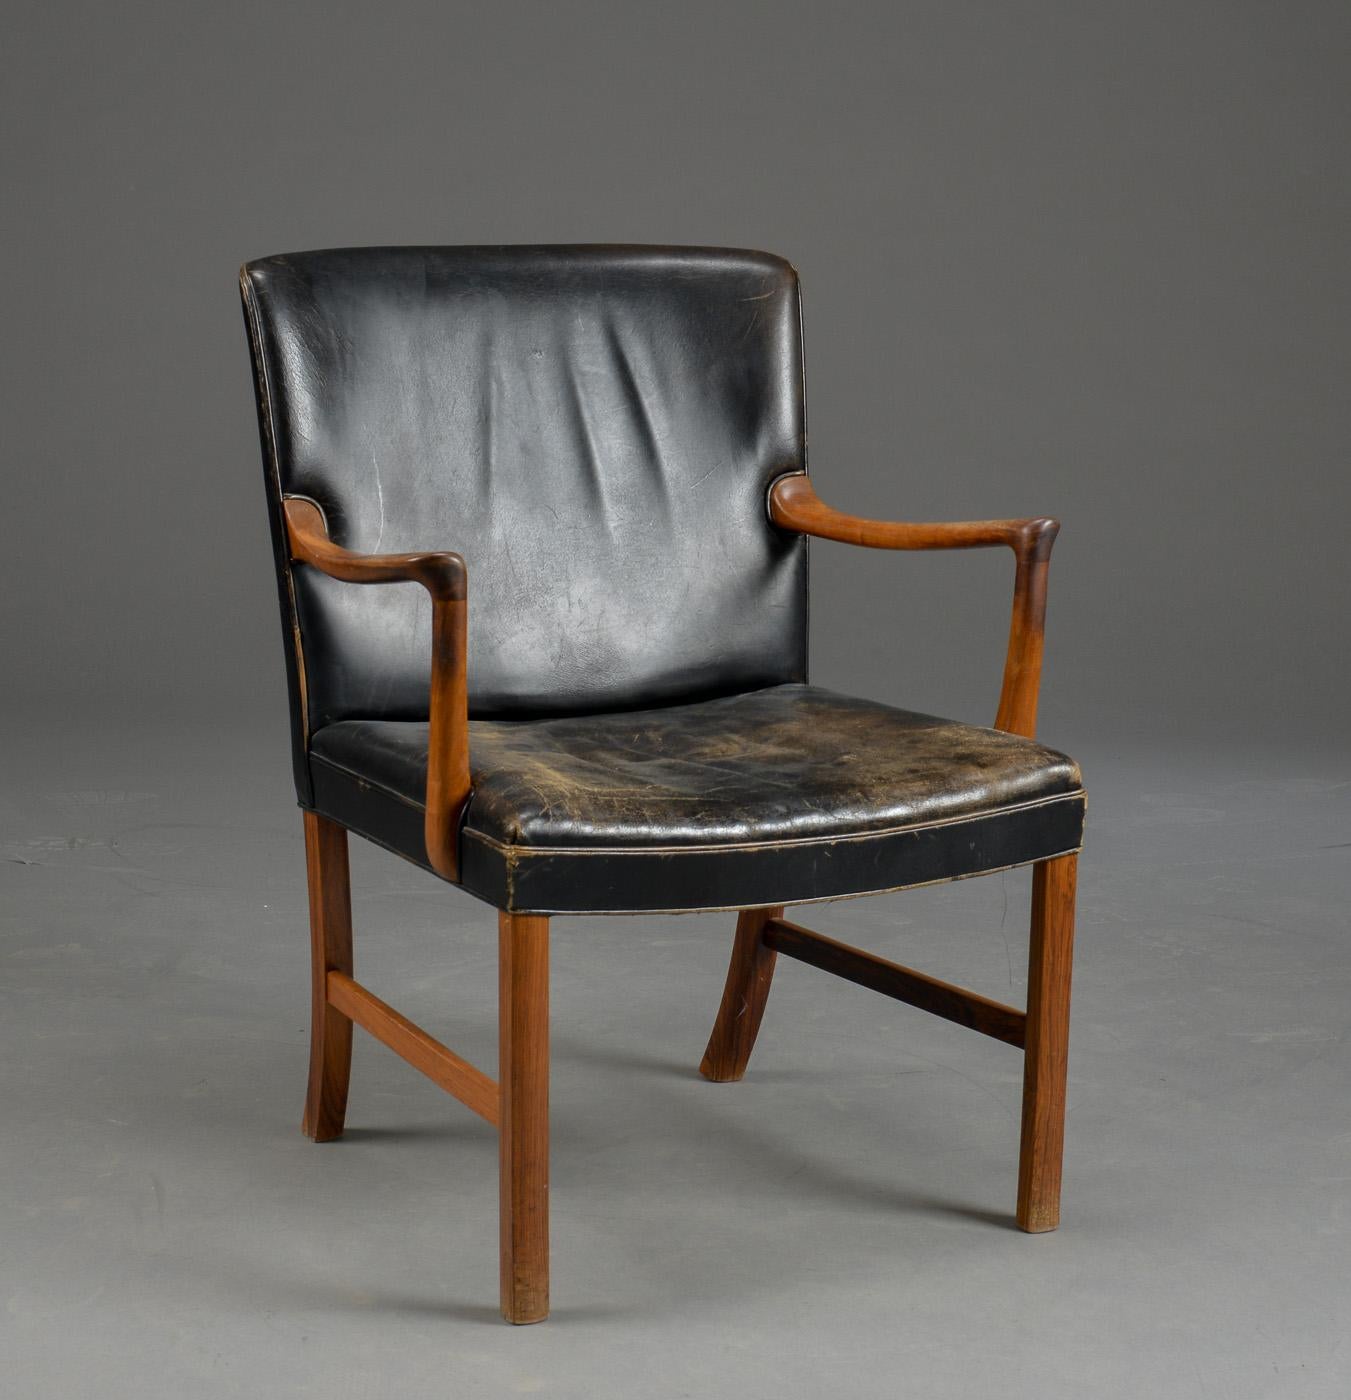 Ole Wanscher armchair model J 3063 by Cabinetmaker A. J. Iversen in Denmark

Leather showing crackling and substantial wear.

Additional cost to reupholster is £1800.